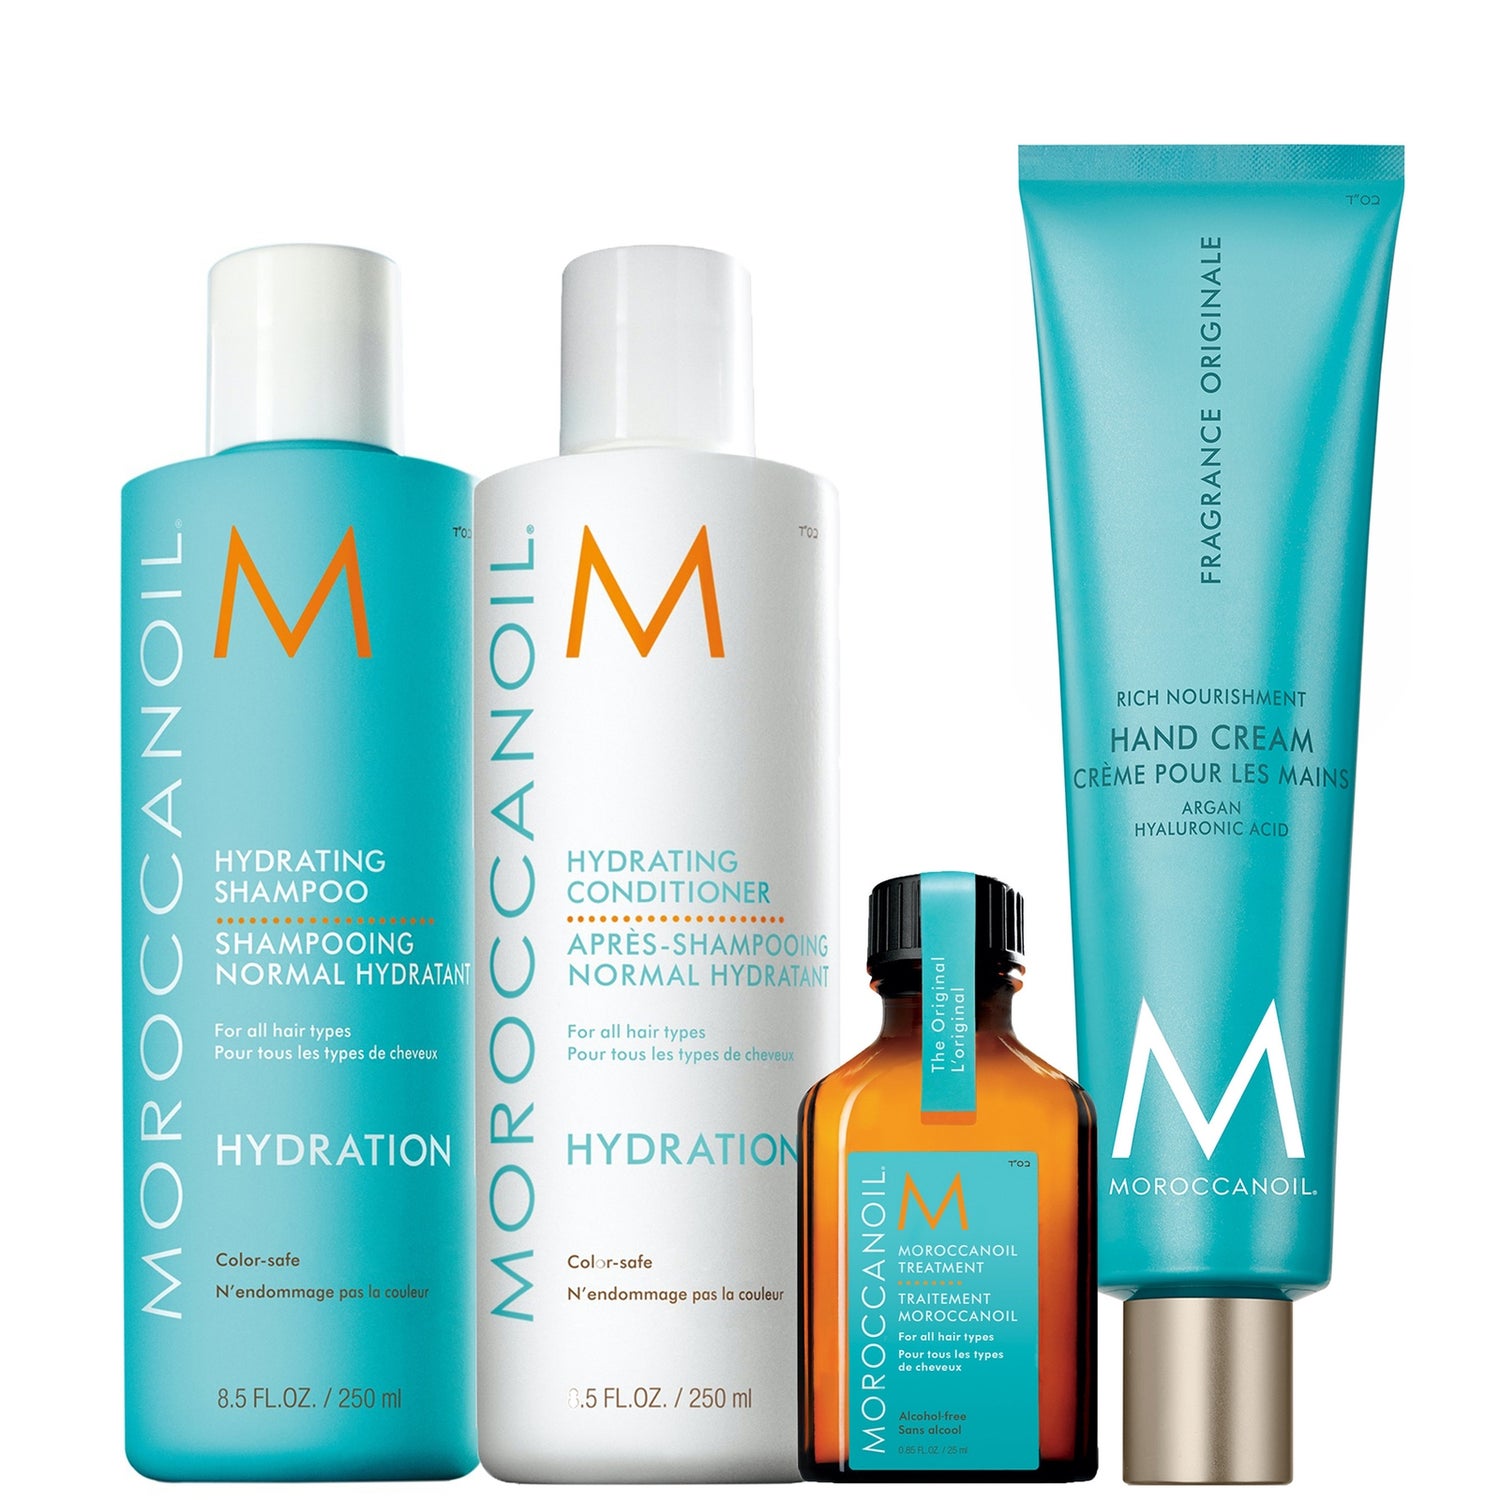 Moroccanoil Hydrating Shampoo and Conditioner with FREE GIFTS (Worth £72.15)